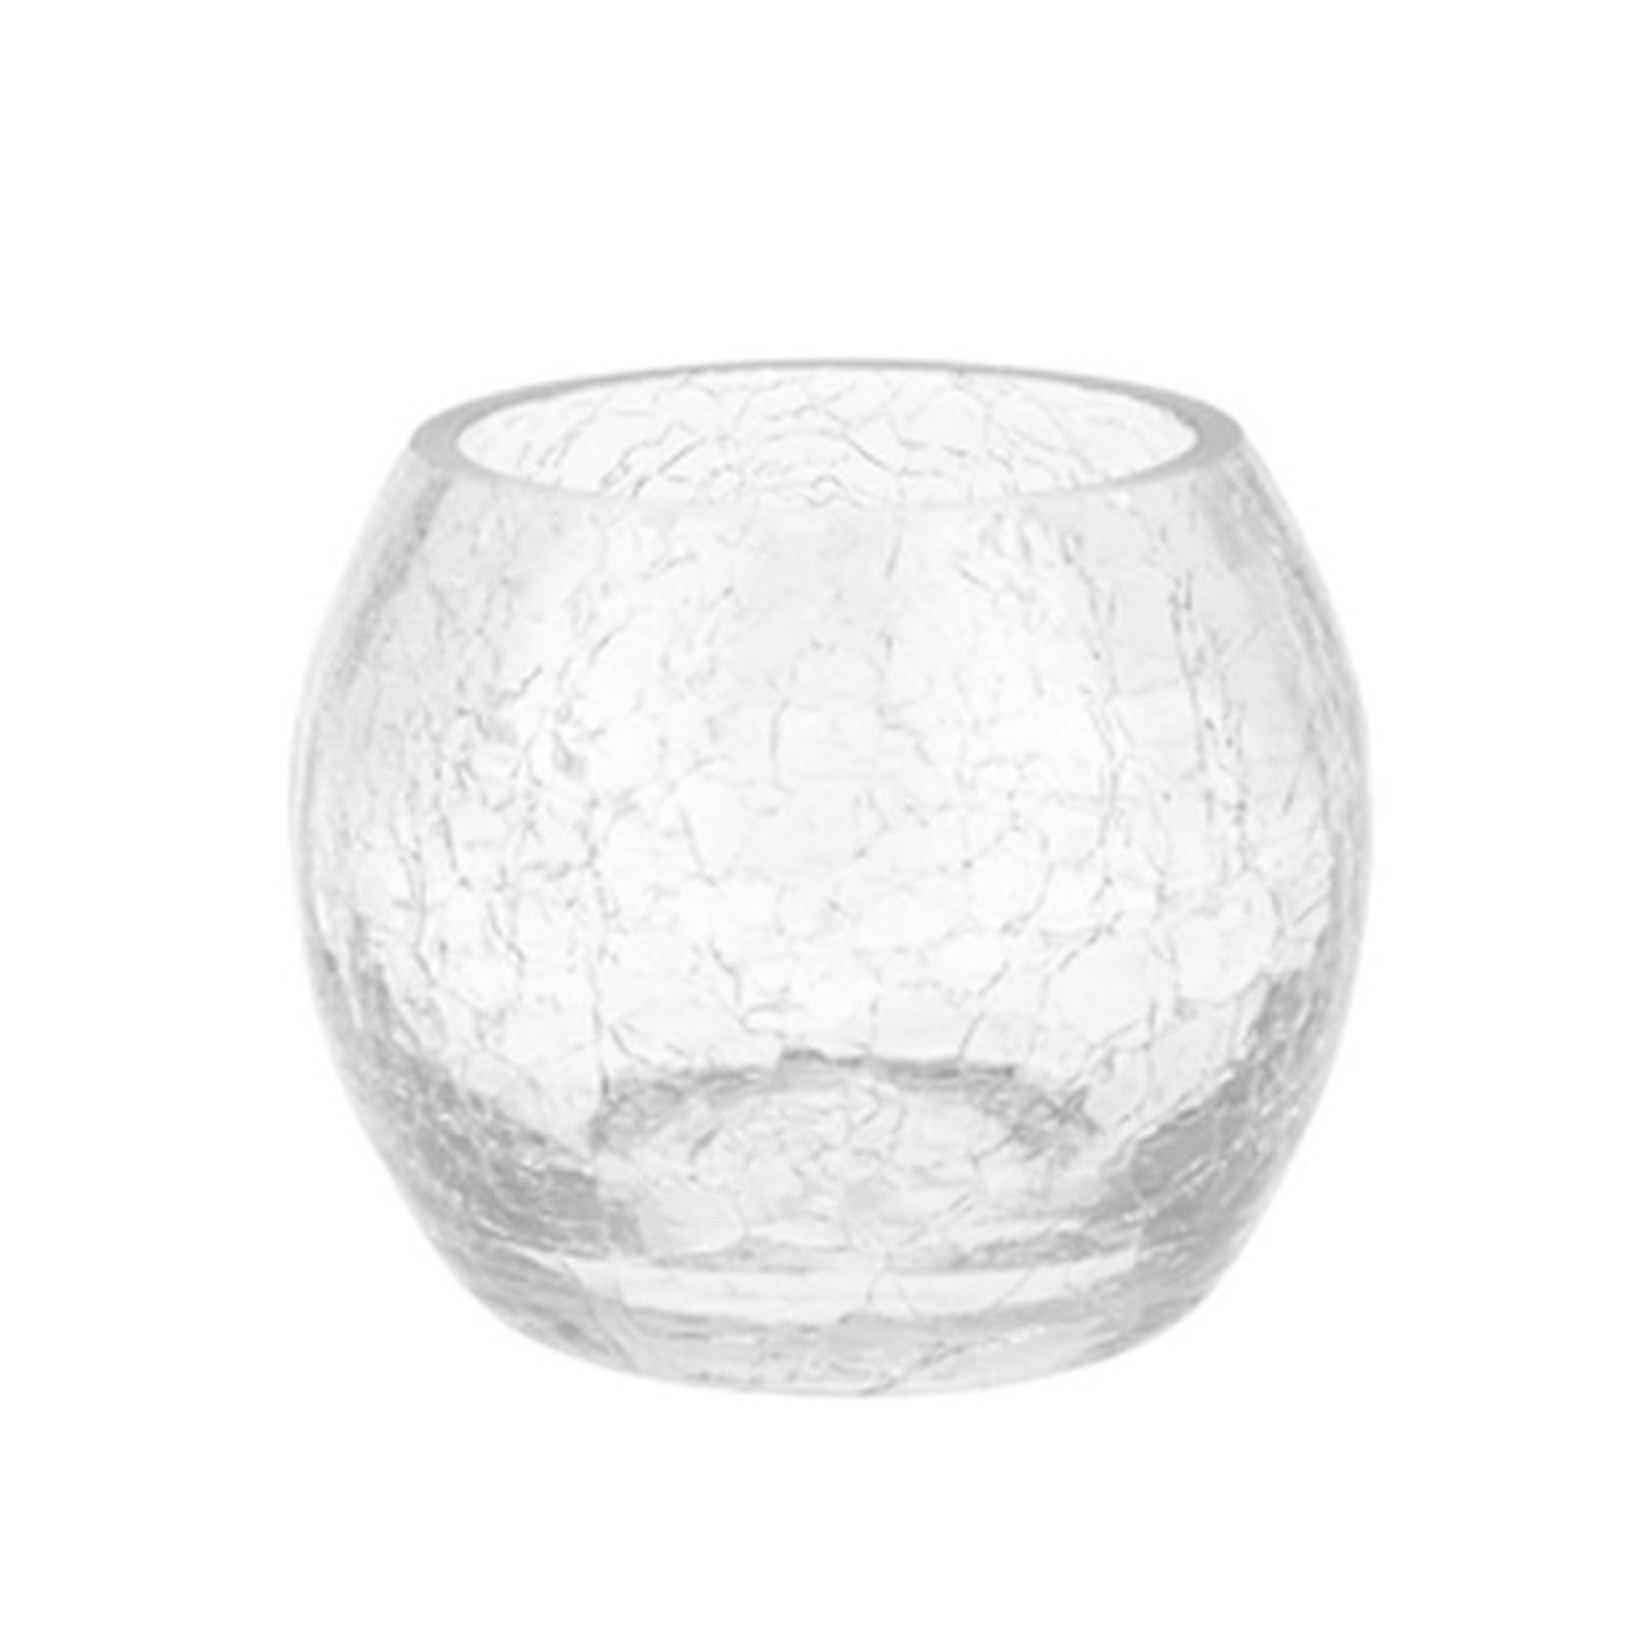 Hudson 43 Candle&Light Collection Round Crackle Glass Candle Holder